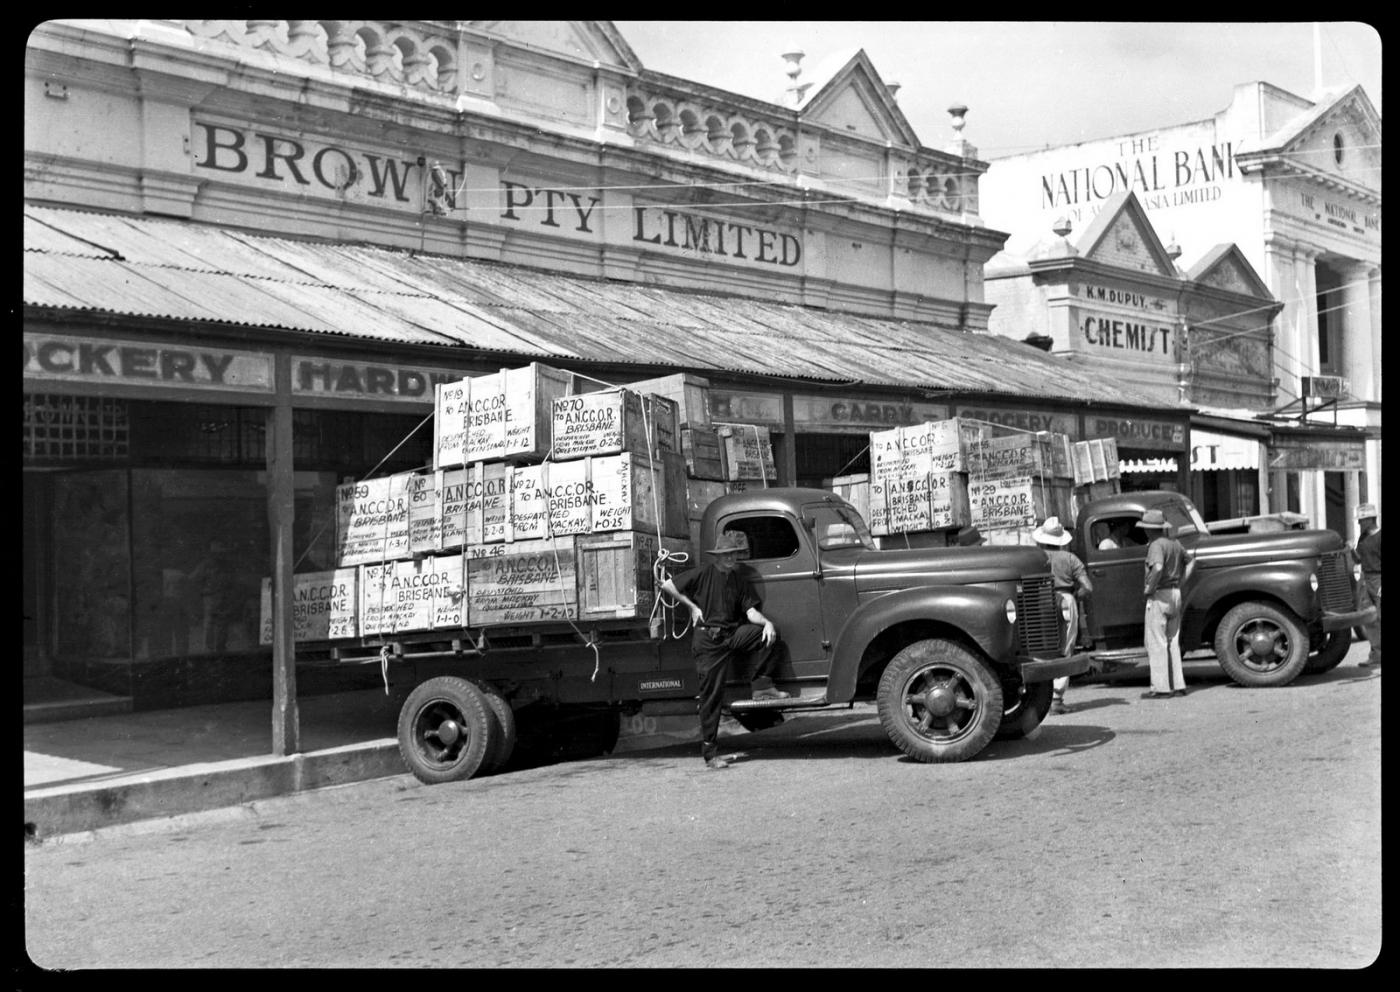 A old-style Ford truck laden with boxes making a delivery